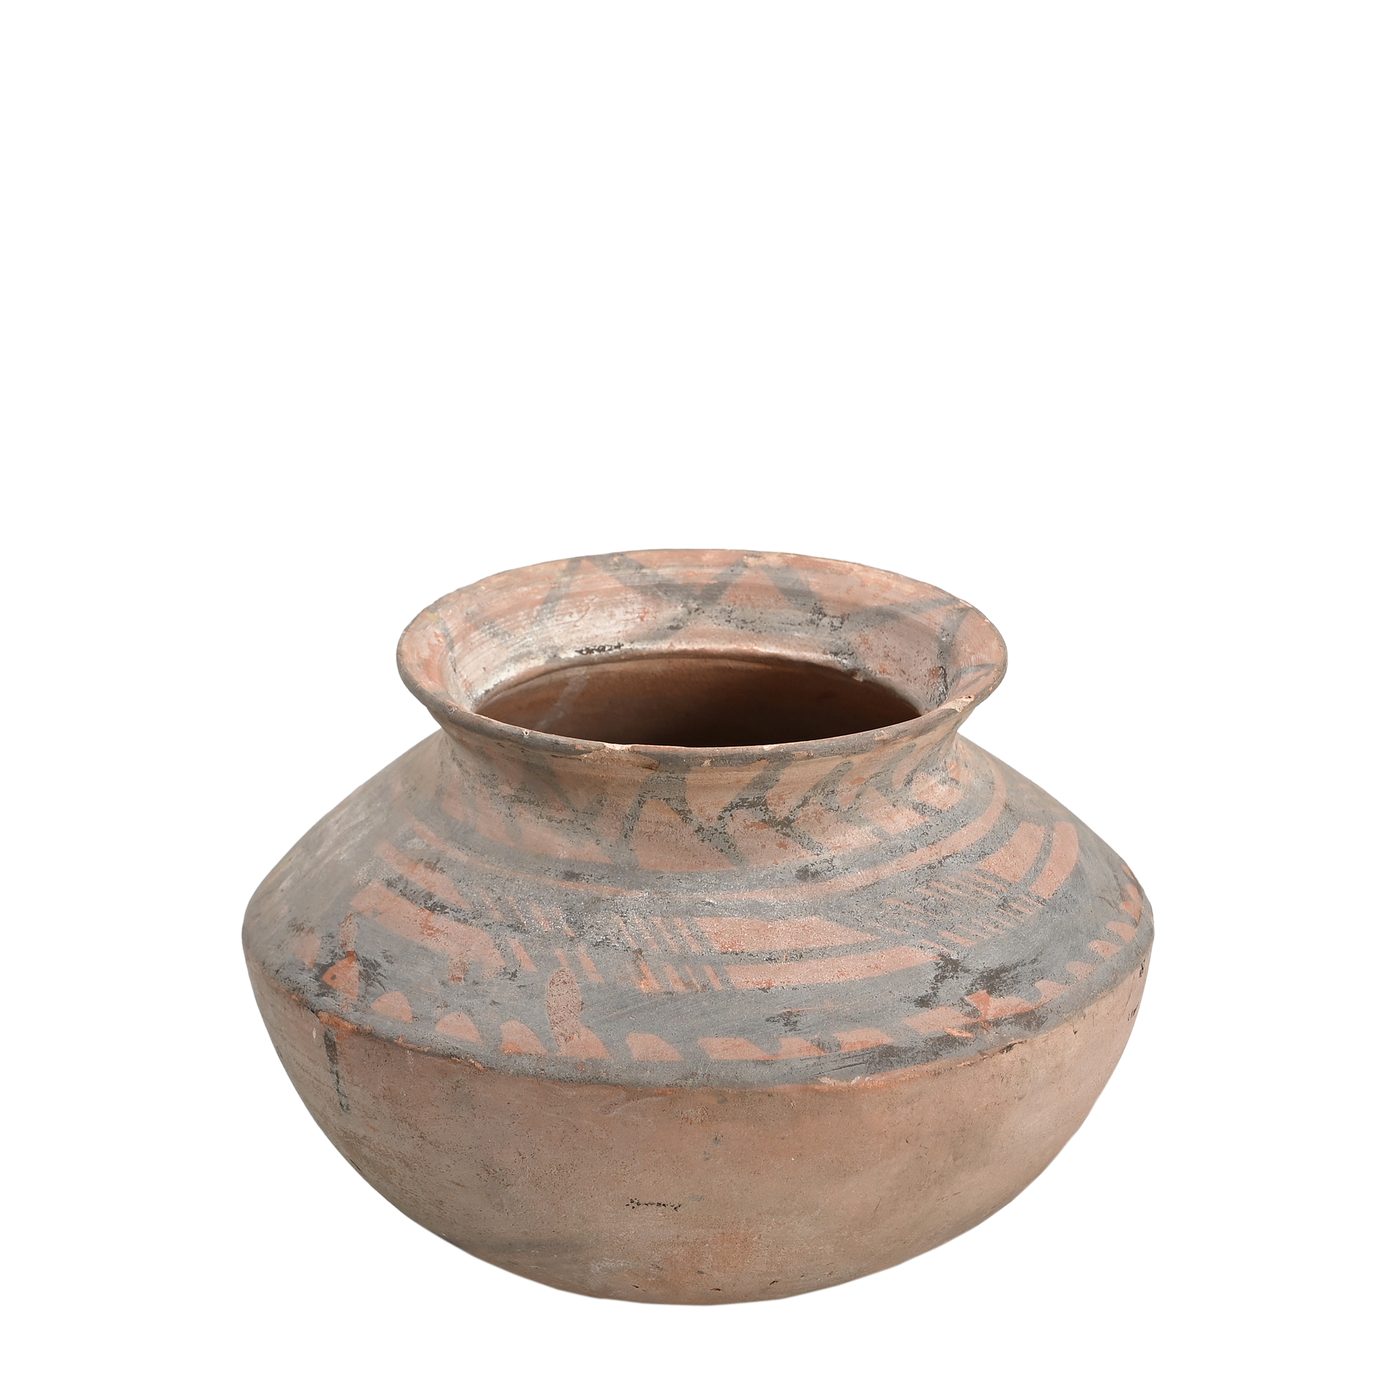 Gaon - Poterie traditionnelle n°46